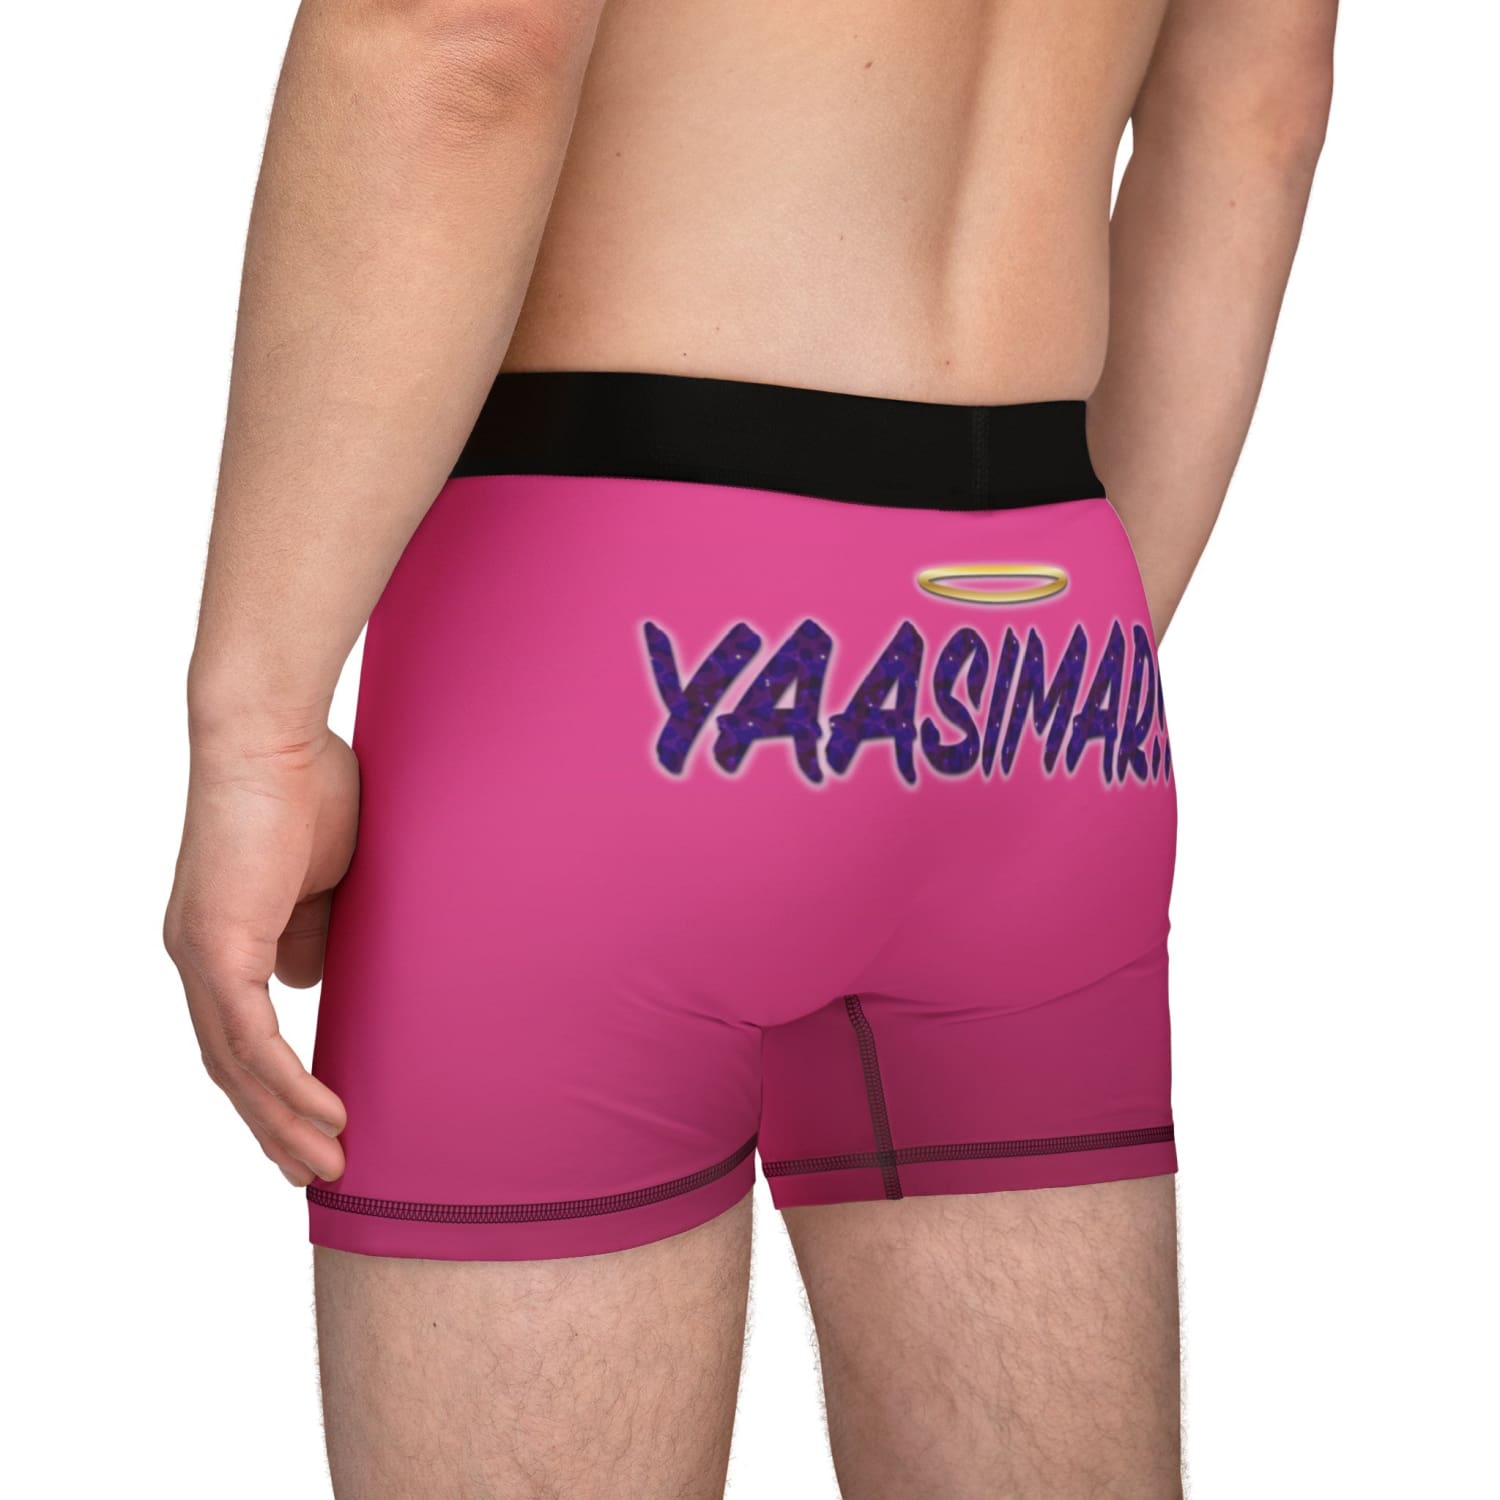 Yaasimar!! Mens Boxer Briefs - All Over Prints